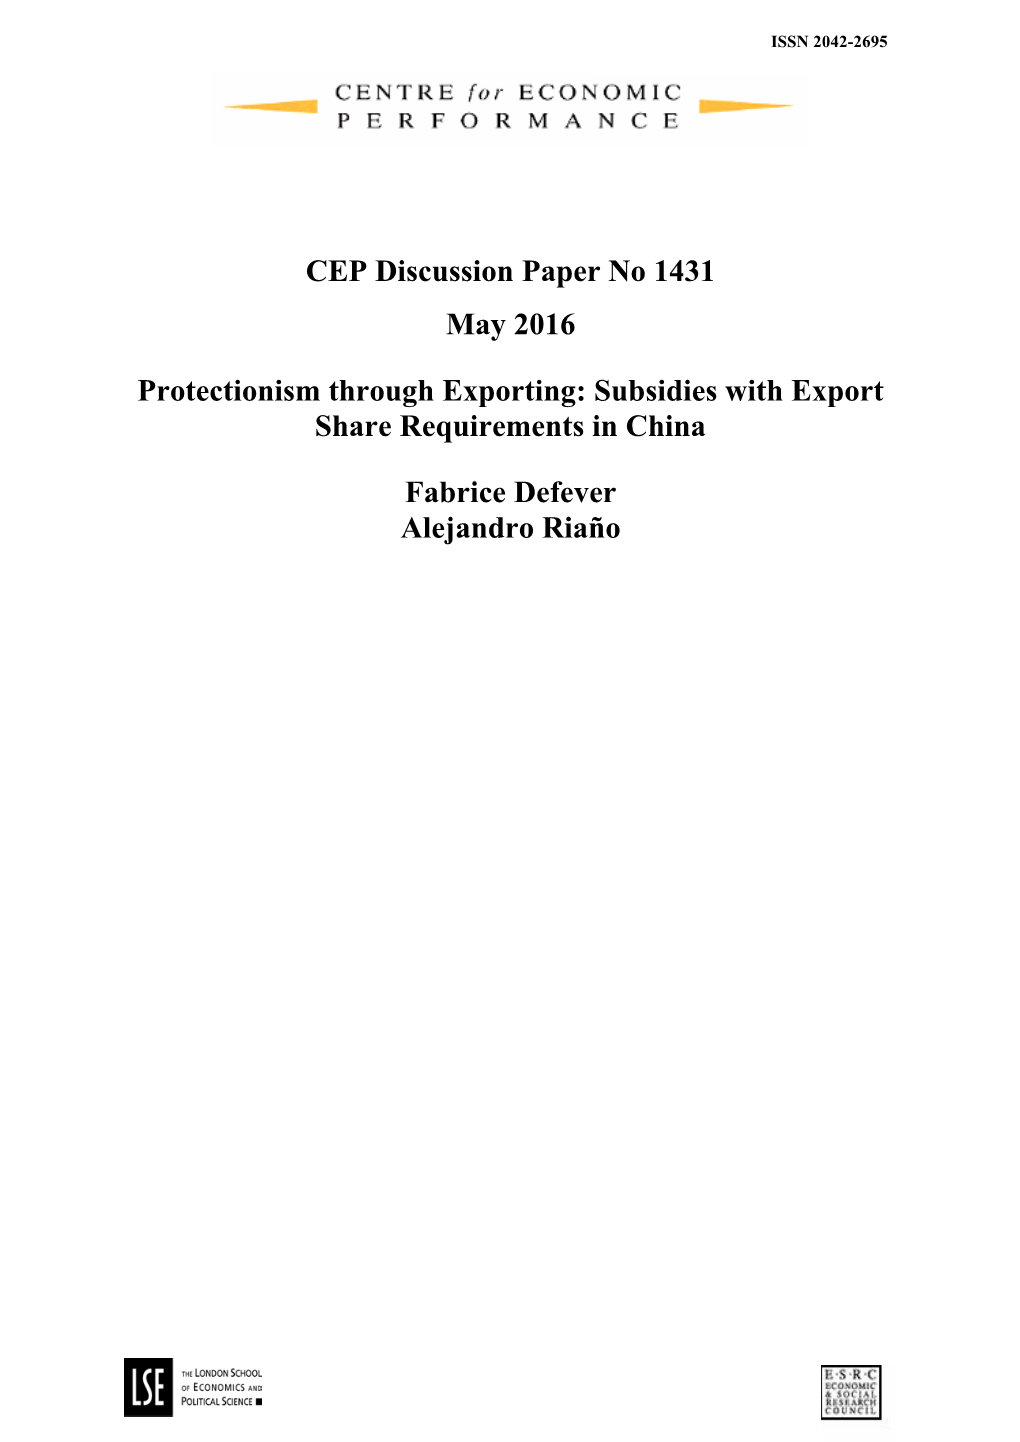 CEP Discussion Paper No 1431 May 2016 Protectionism Through